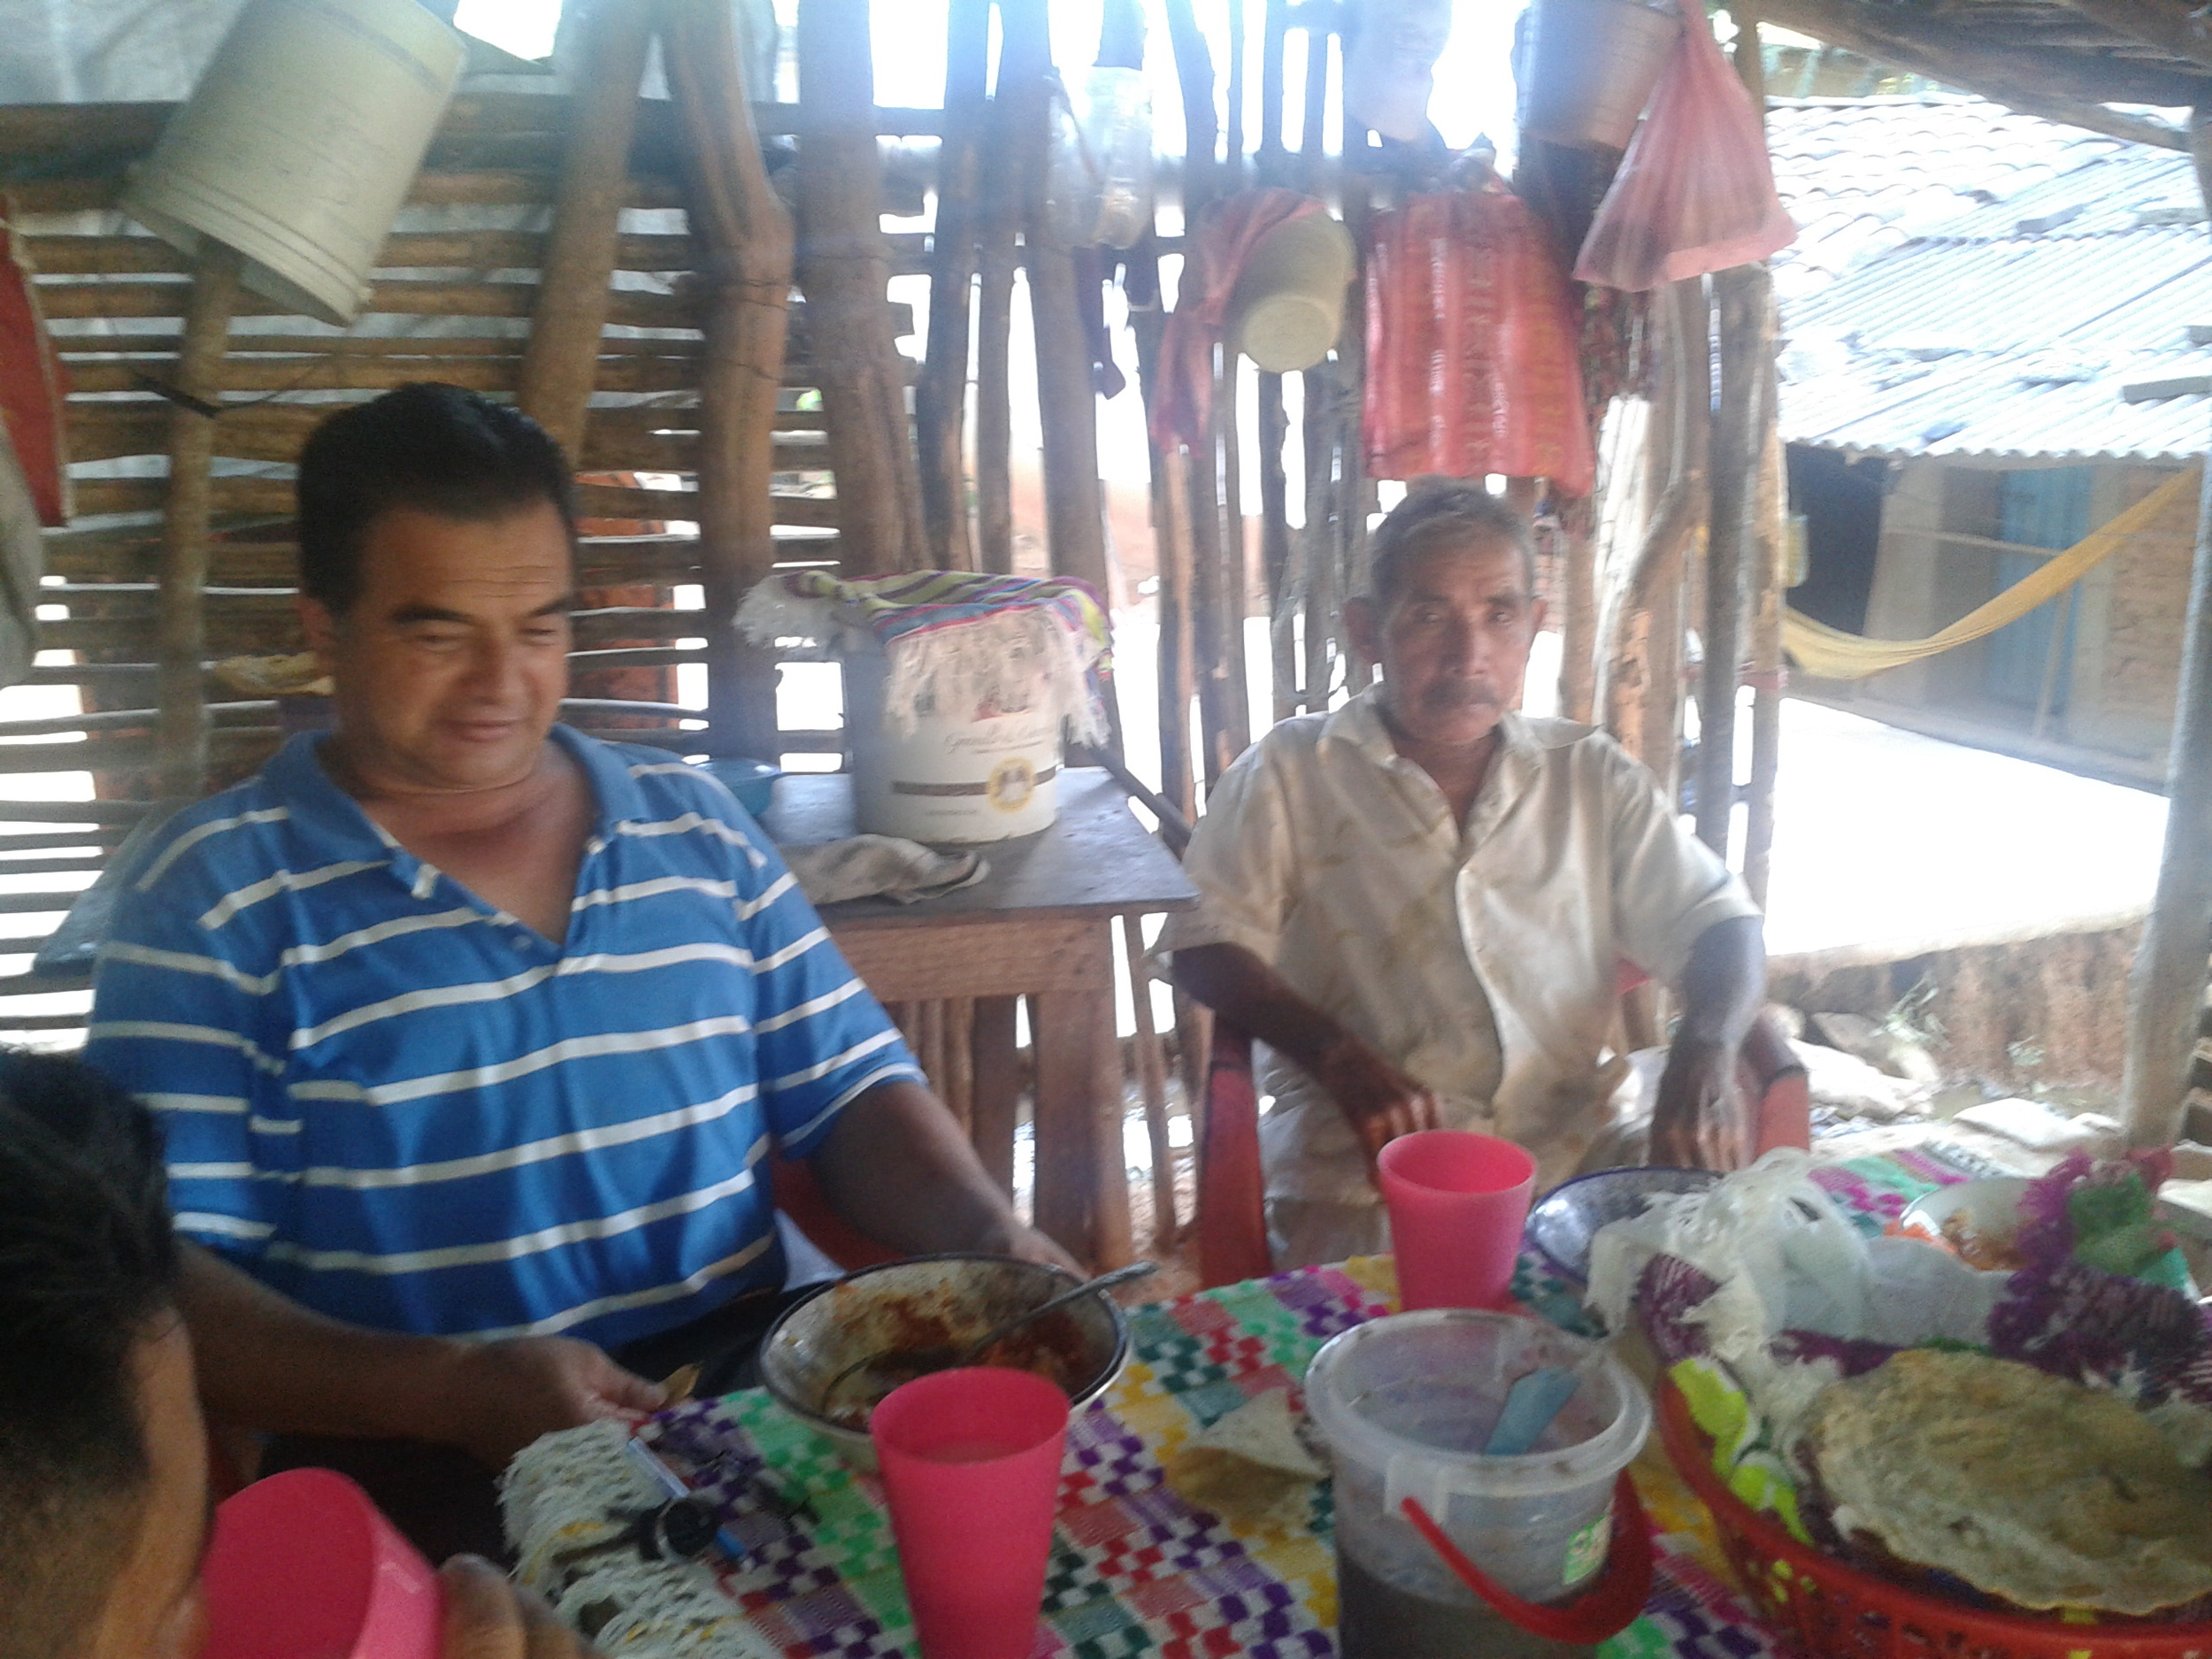  Norberto, left, and the pastor, eating at a home in&nbsp; La Hierba Santa  